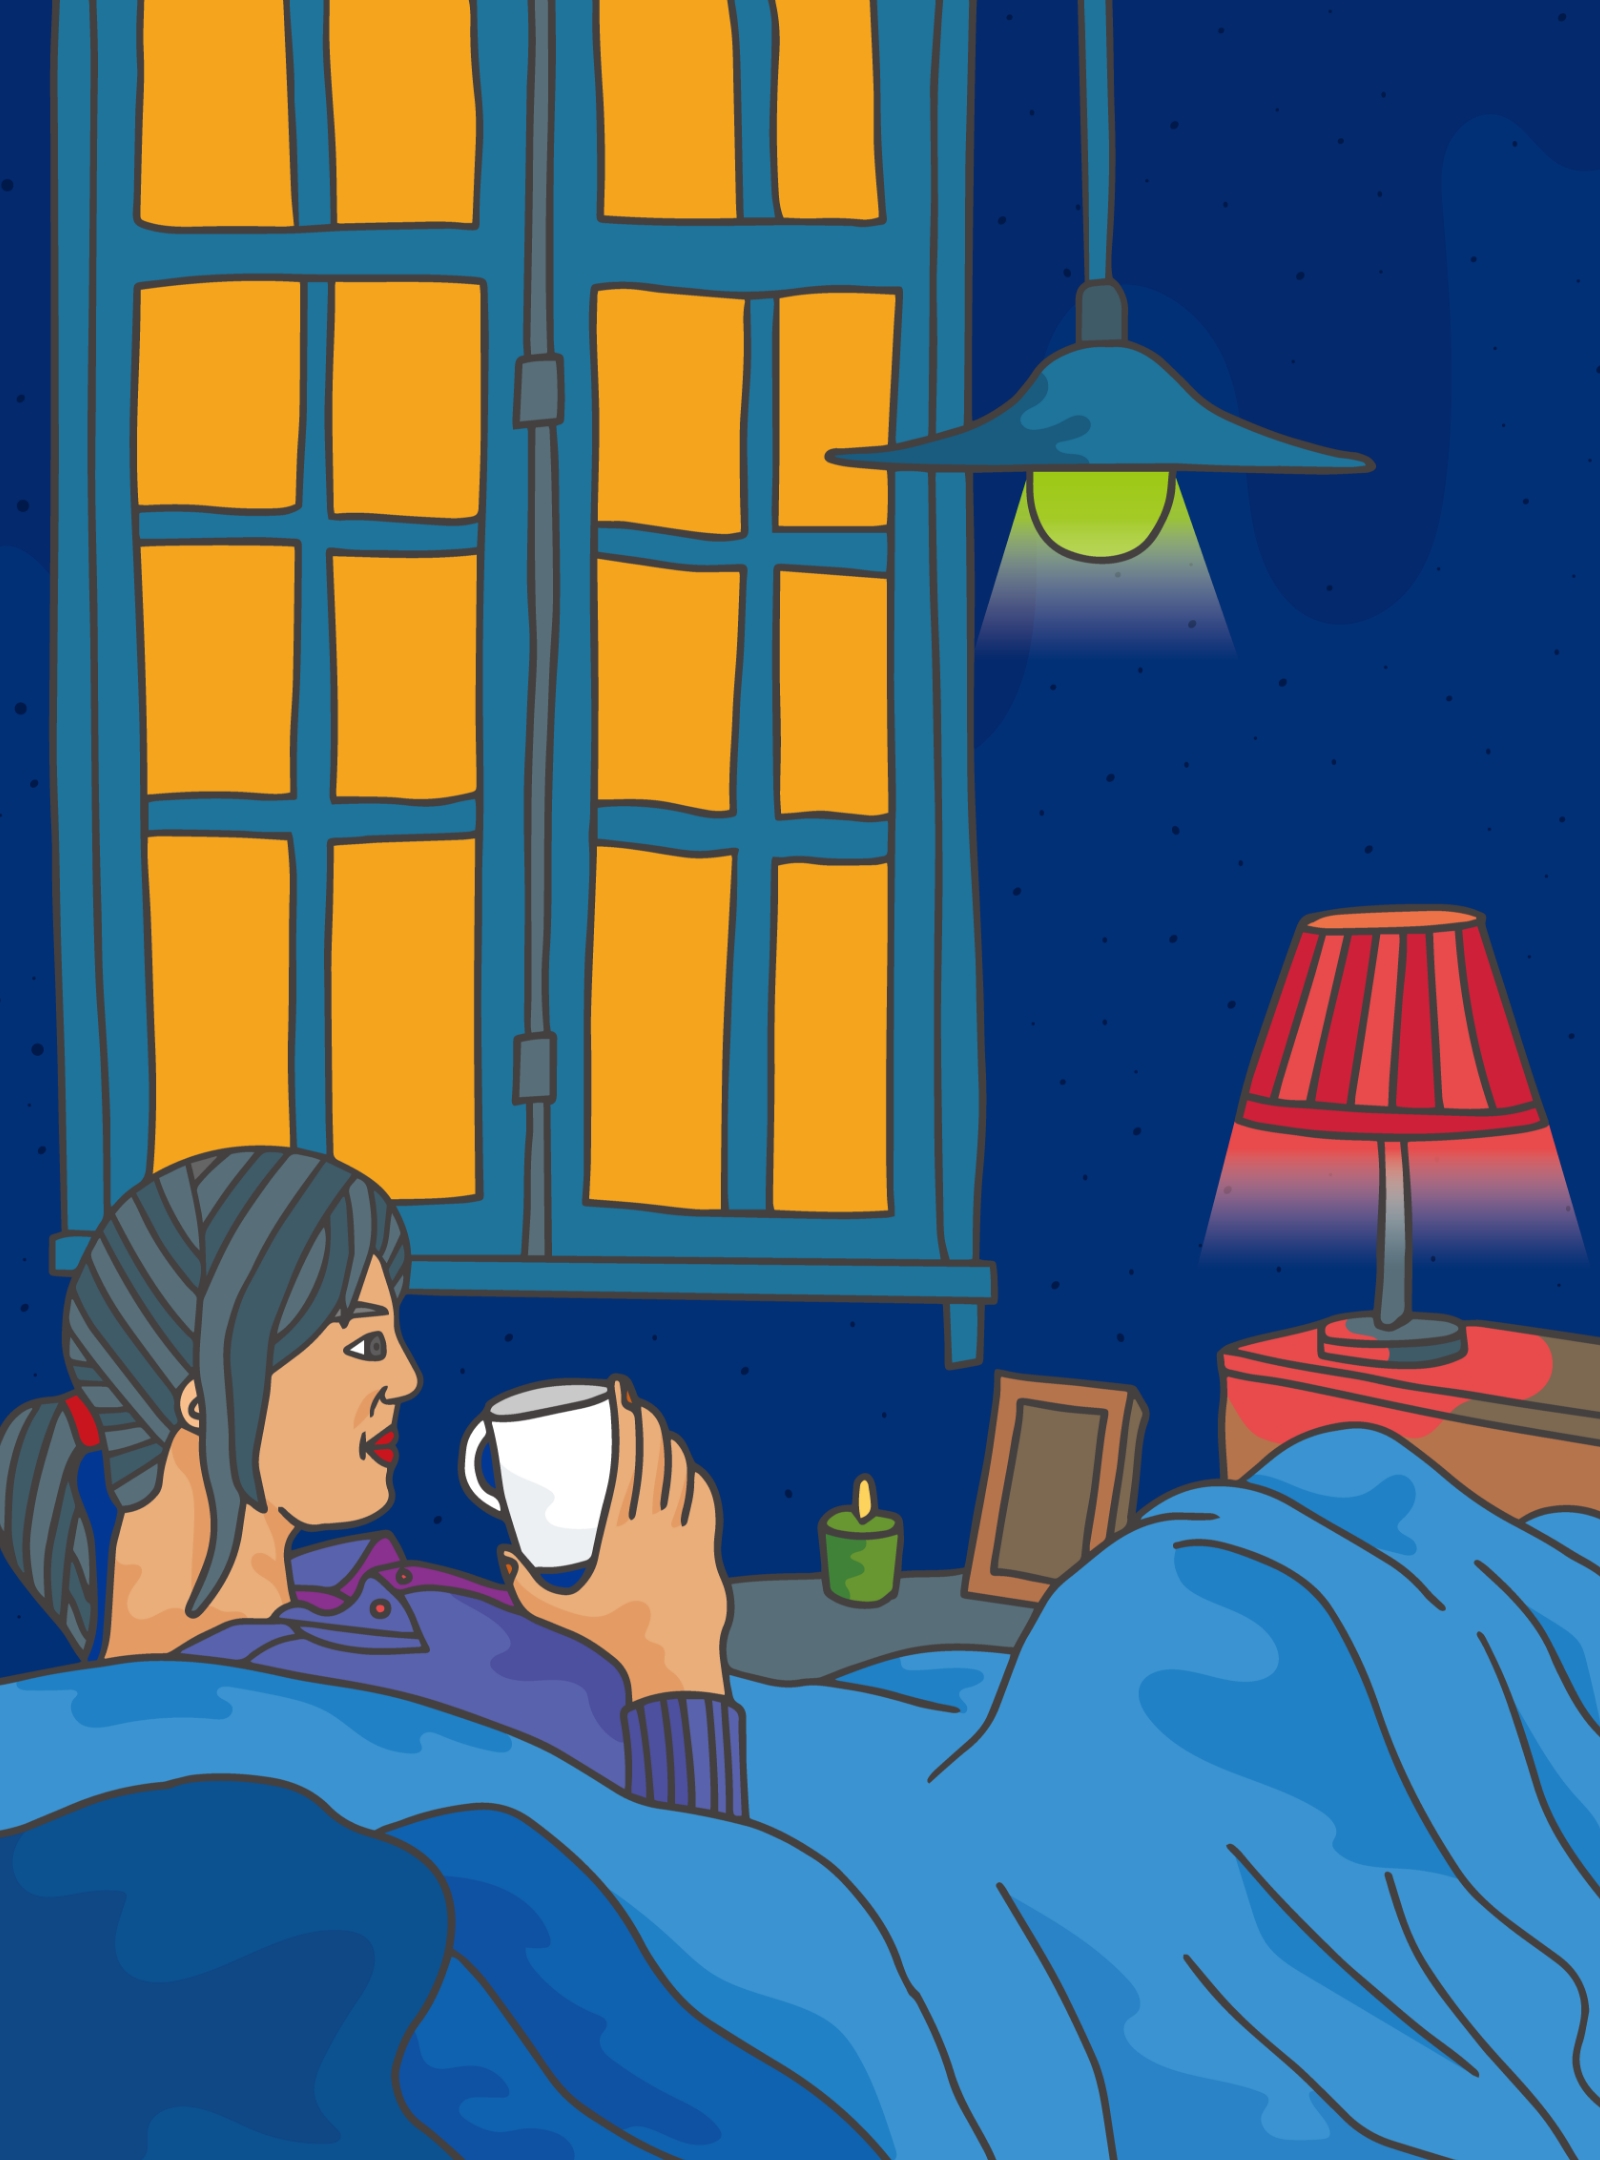 Woman who is hard of hearing lies in bed in a dark room, drinking from a mug. The light from her lamp is red, showing she can be visually alerted to sounds using SmartThings.